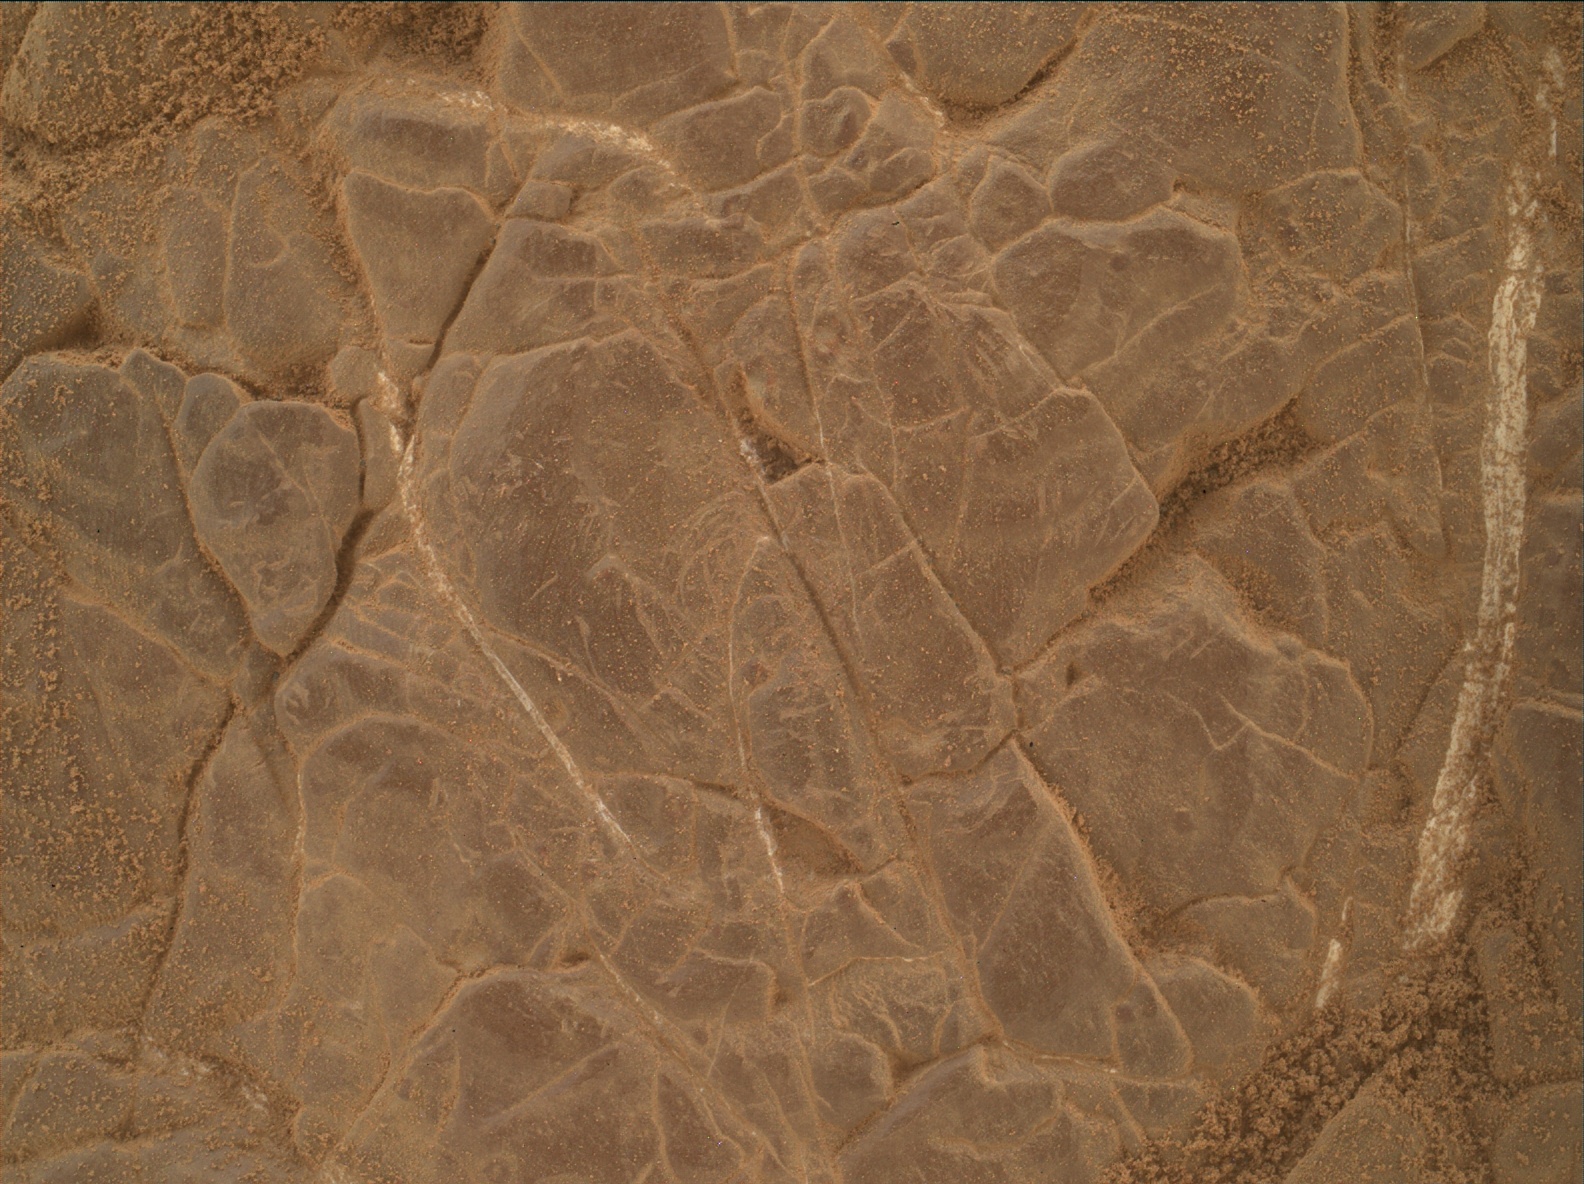 Nasa's Mars rover Curiosity acquired this image using its Mars Hand Lens Imager (MAHLI) on Sol 3018